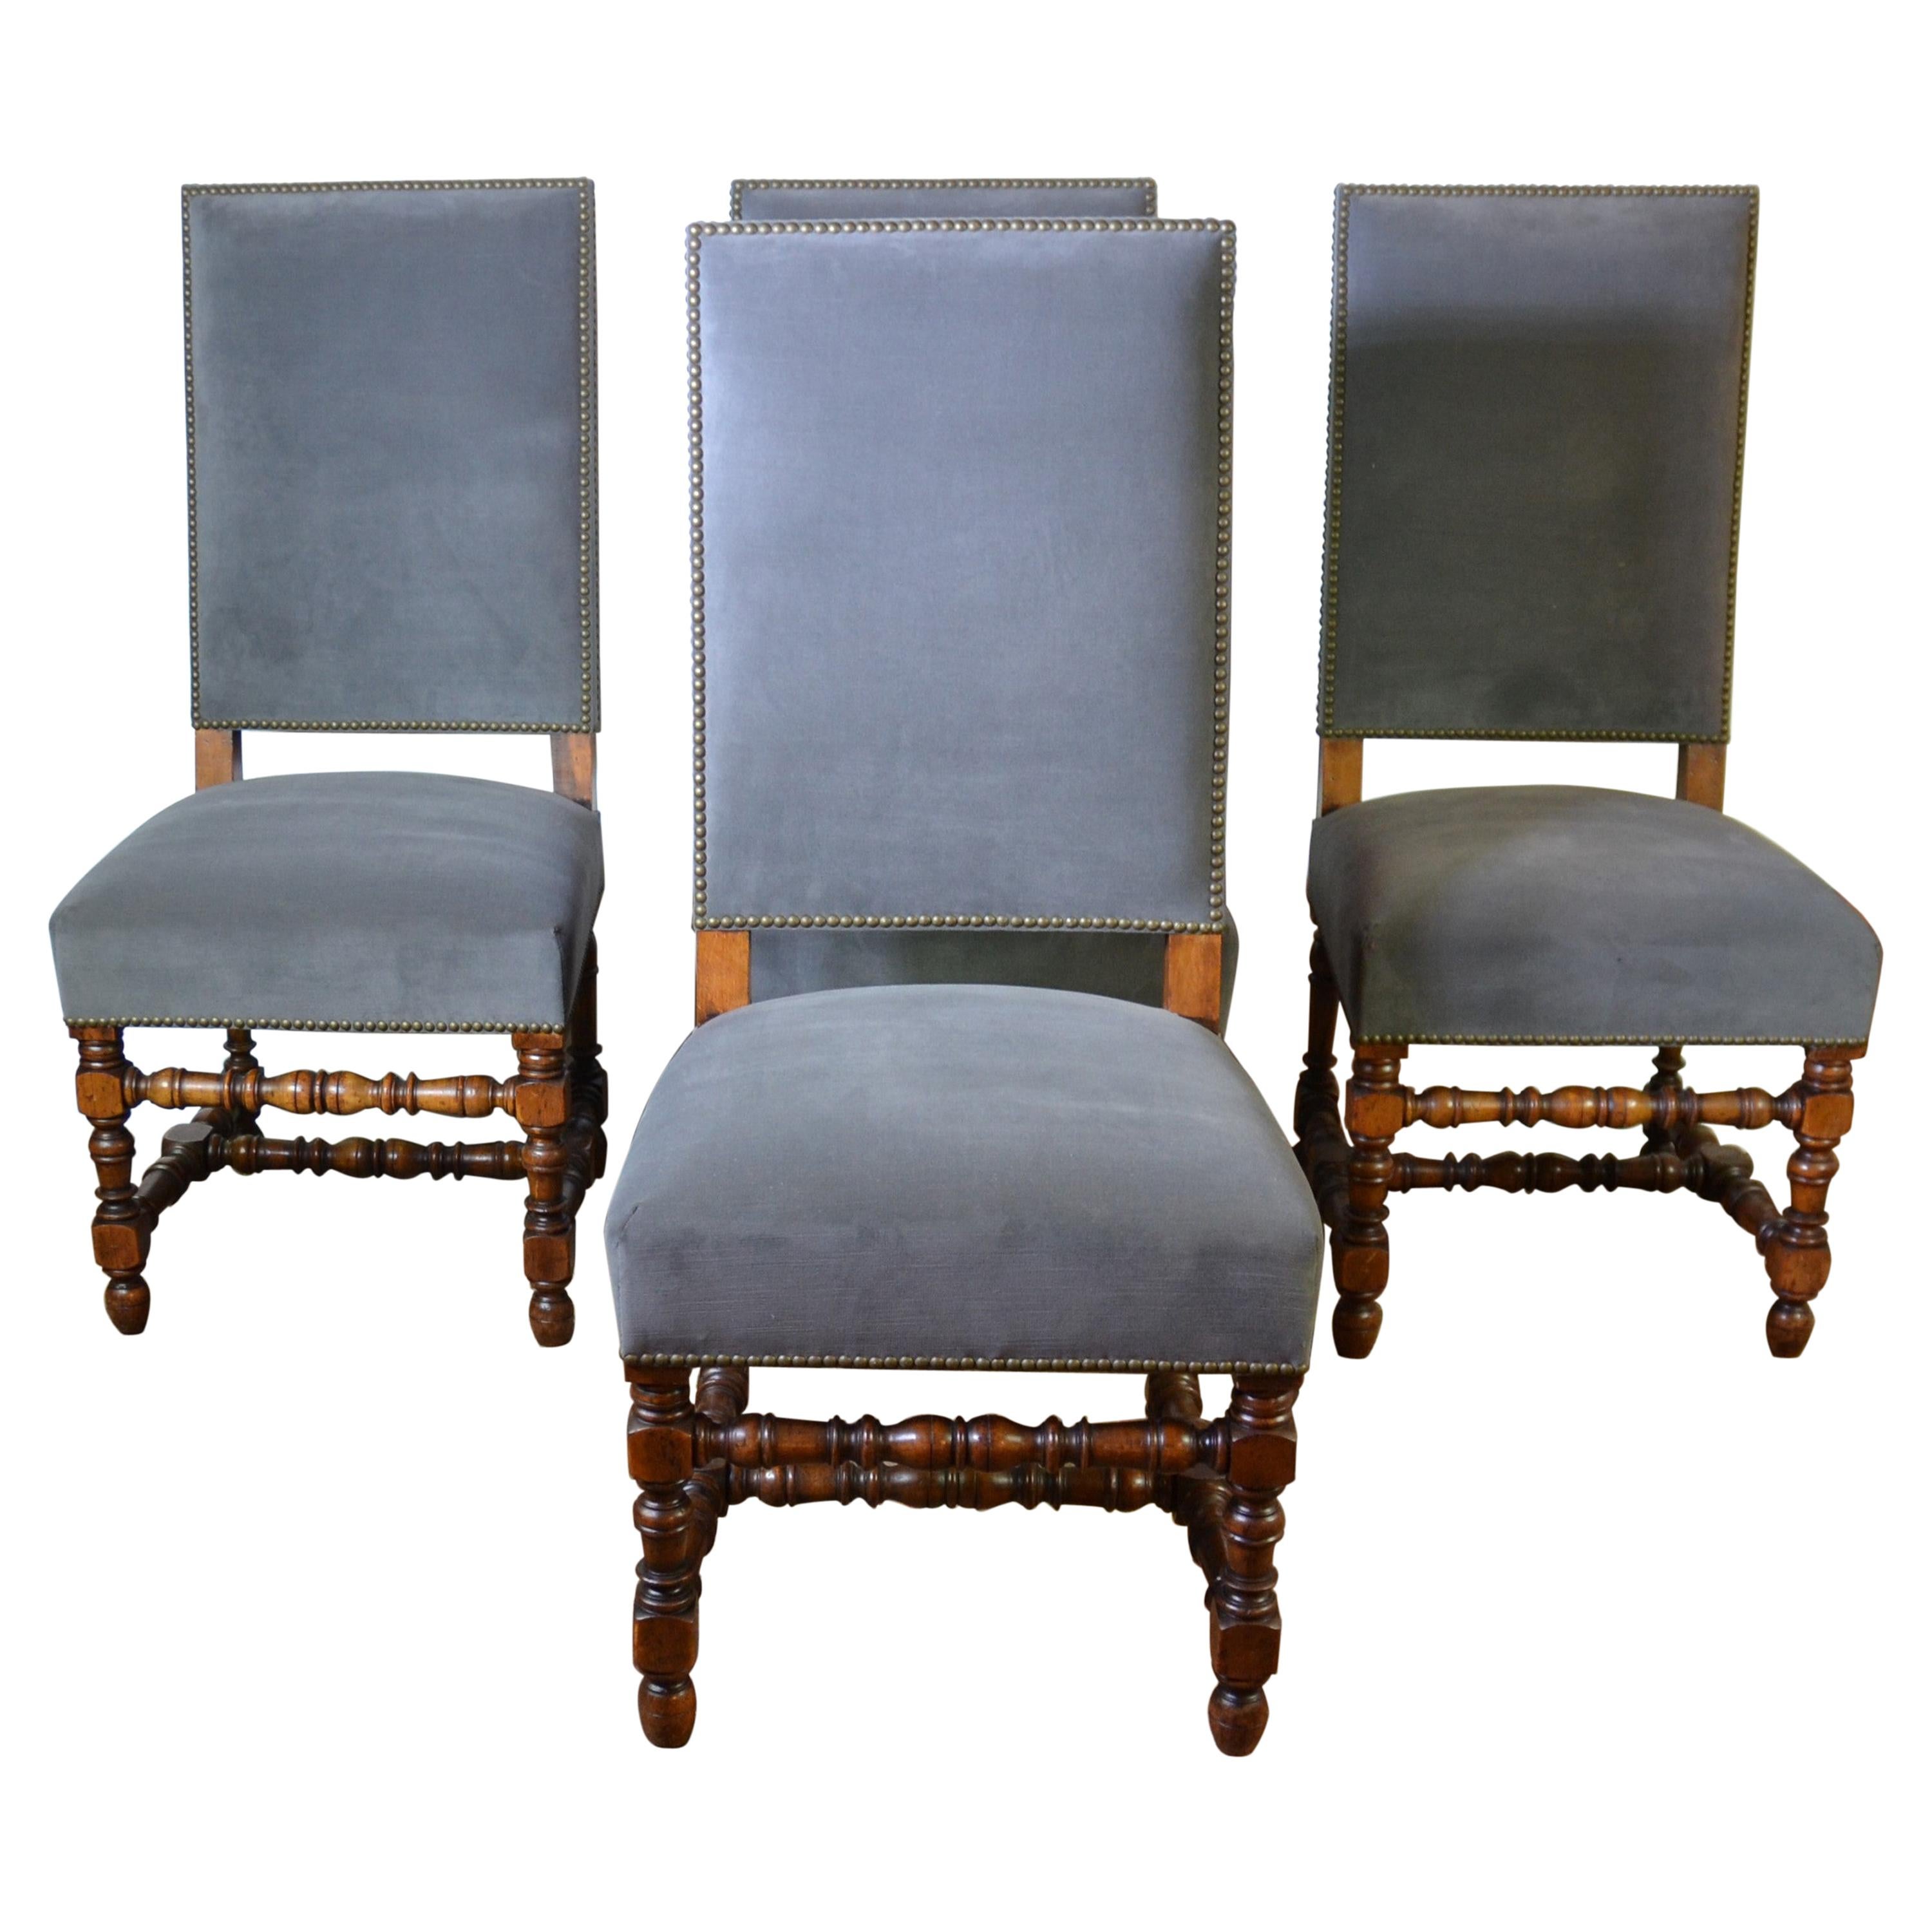 Set of 4 Antique High Back Dining Chairs